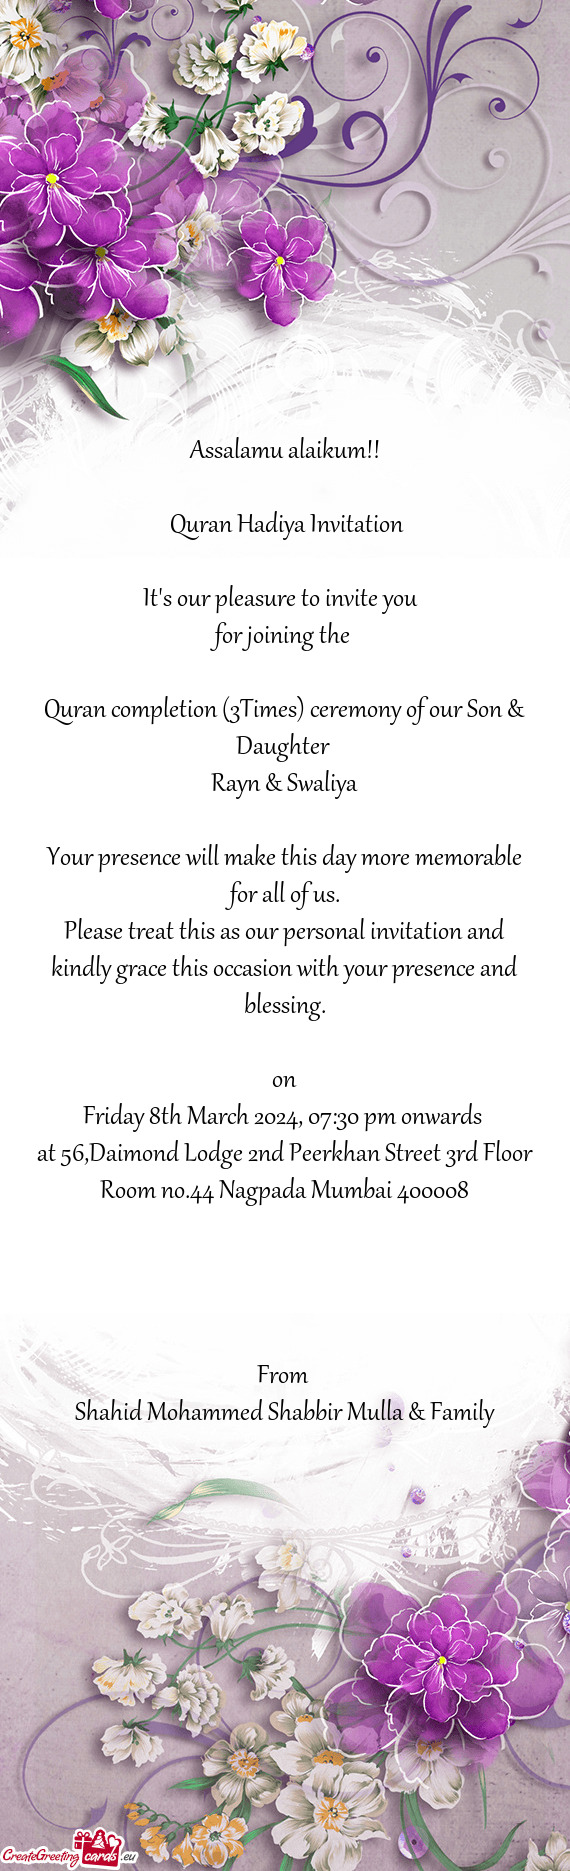 Quran completion (3Times) ceremony of our Son & Daughter